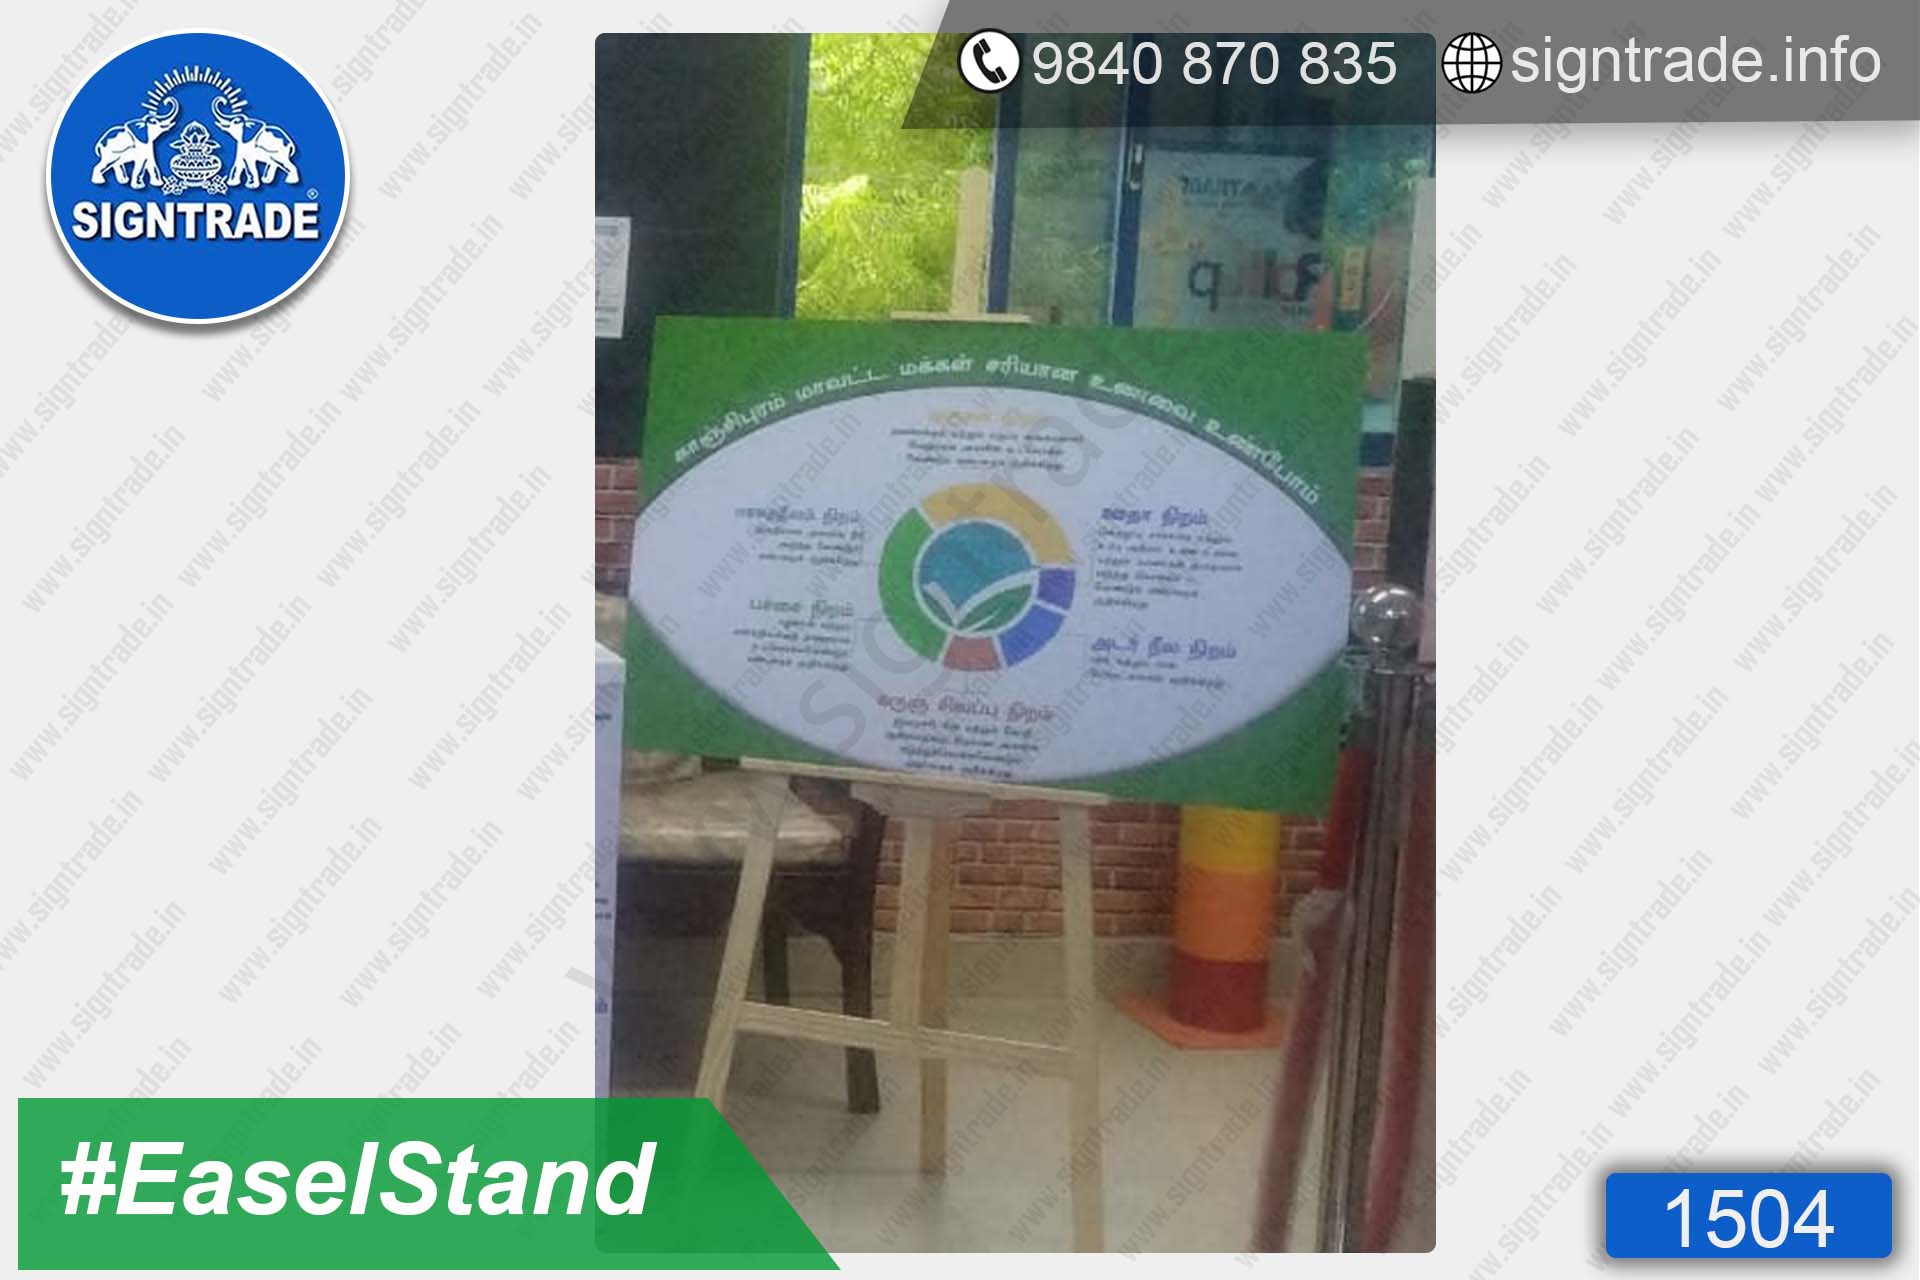 Food Safety Department, Kancheepuram District, Chennai - Easel Stand, Chennai - SIGNTRADE - Promotional Easel Stand Manufacturers in Chennai